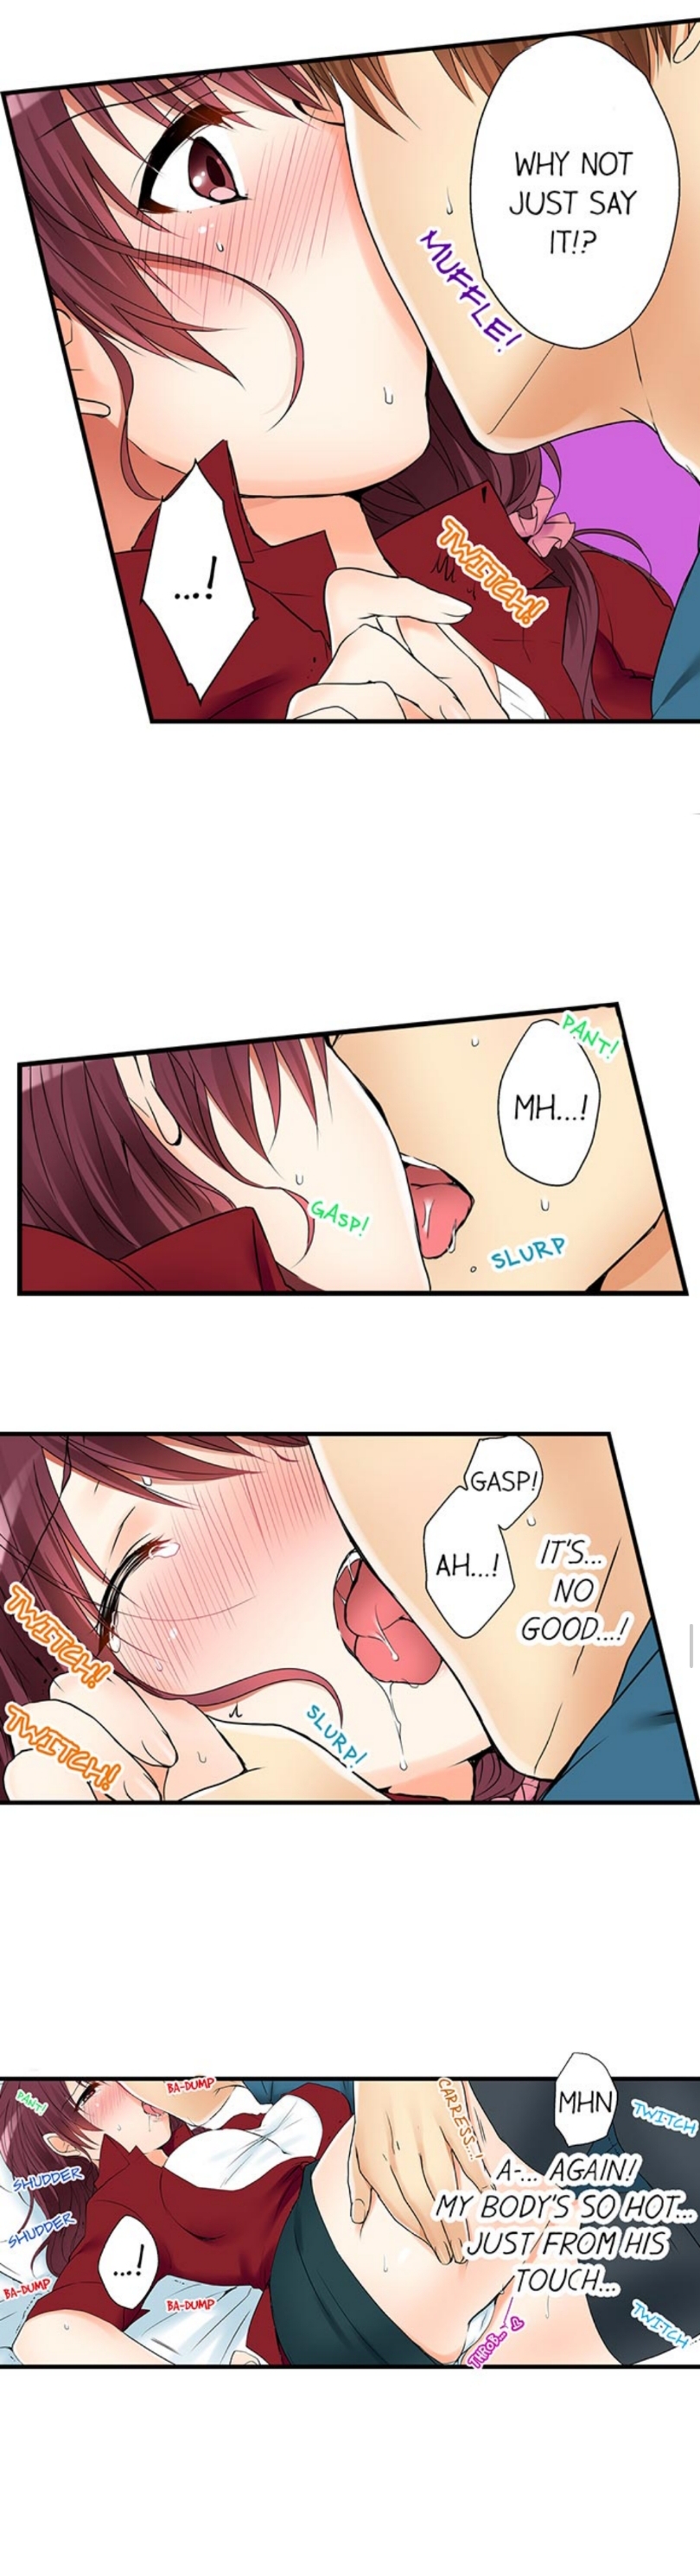 [Kouno Aya] I_Did_Naughty_Things_With_My_(Drunk)_Sister (Ongoing) [煌乃あや] 姉貴(泥酔中)と…Hしちゃいました。